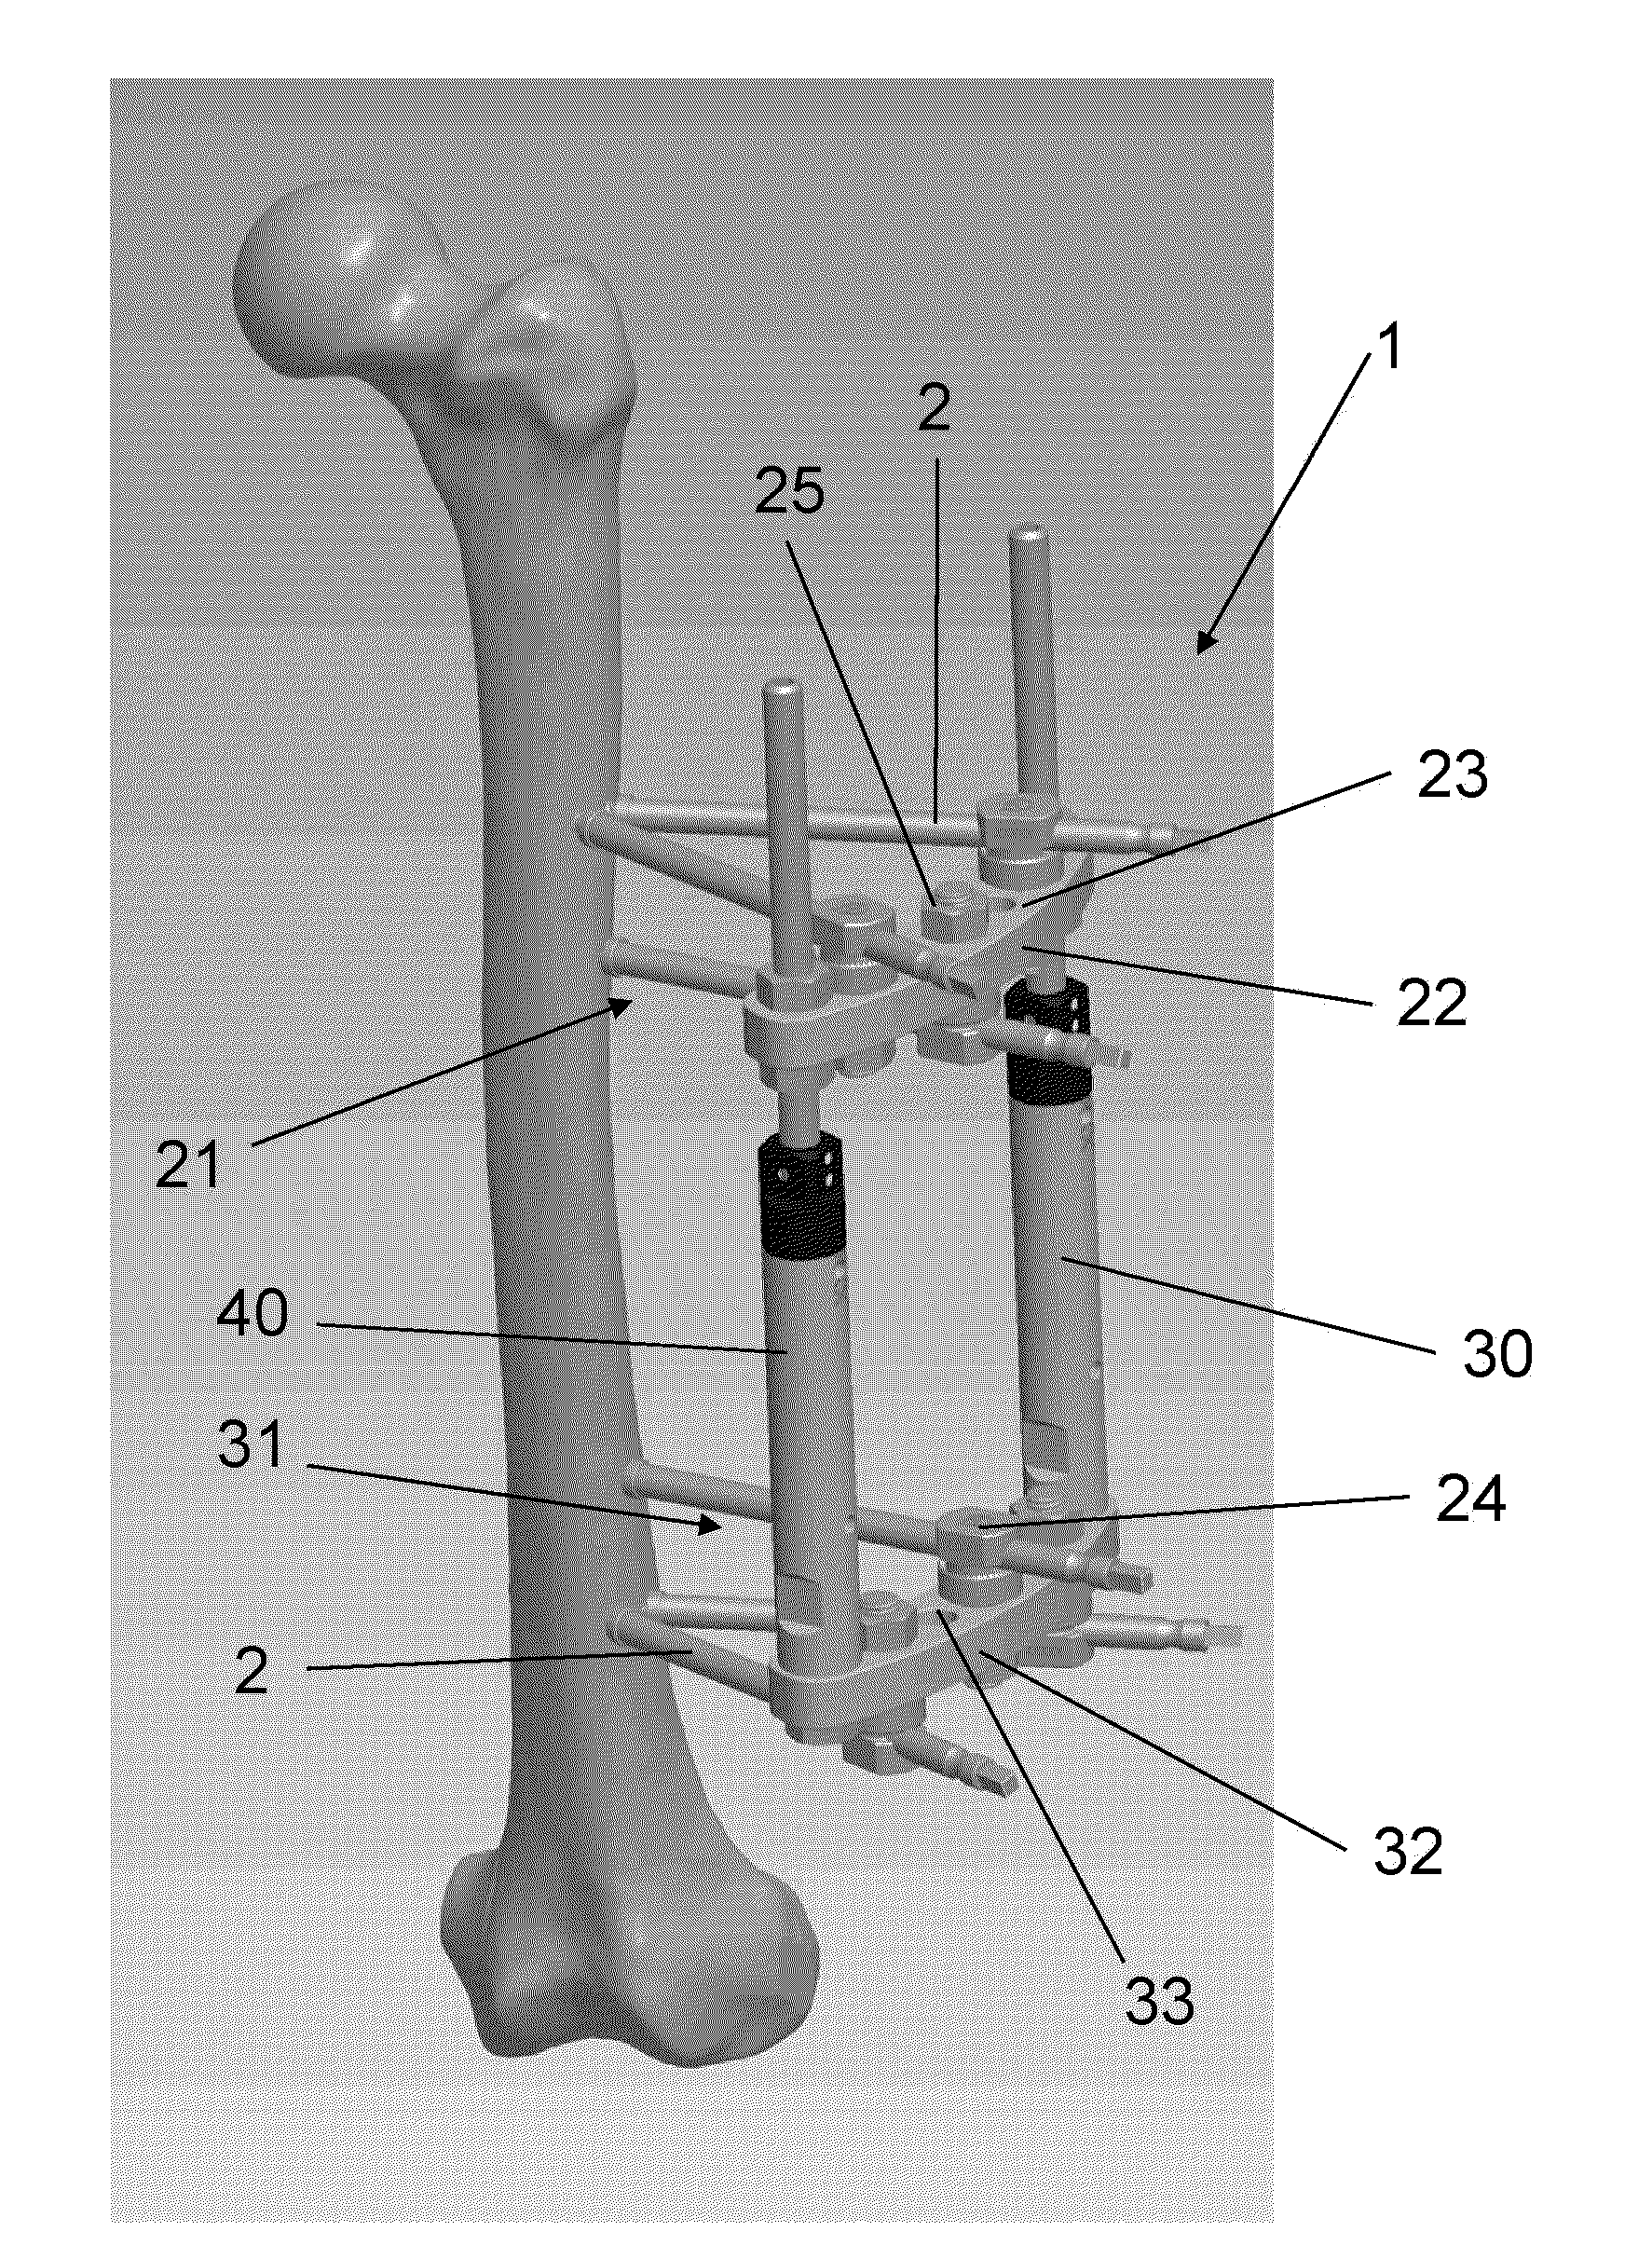 Method for Treating a Fracture of a Bone Having a Medullary Canal